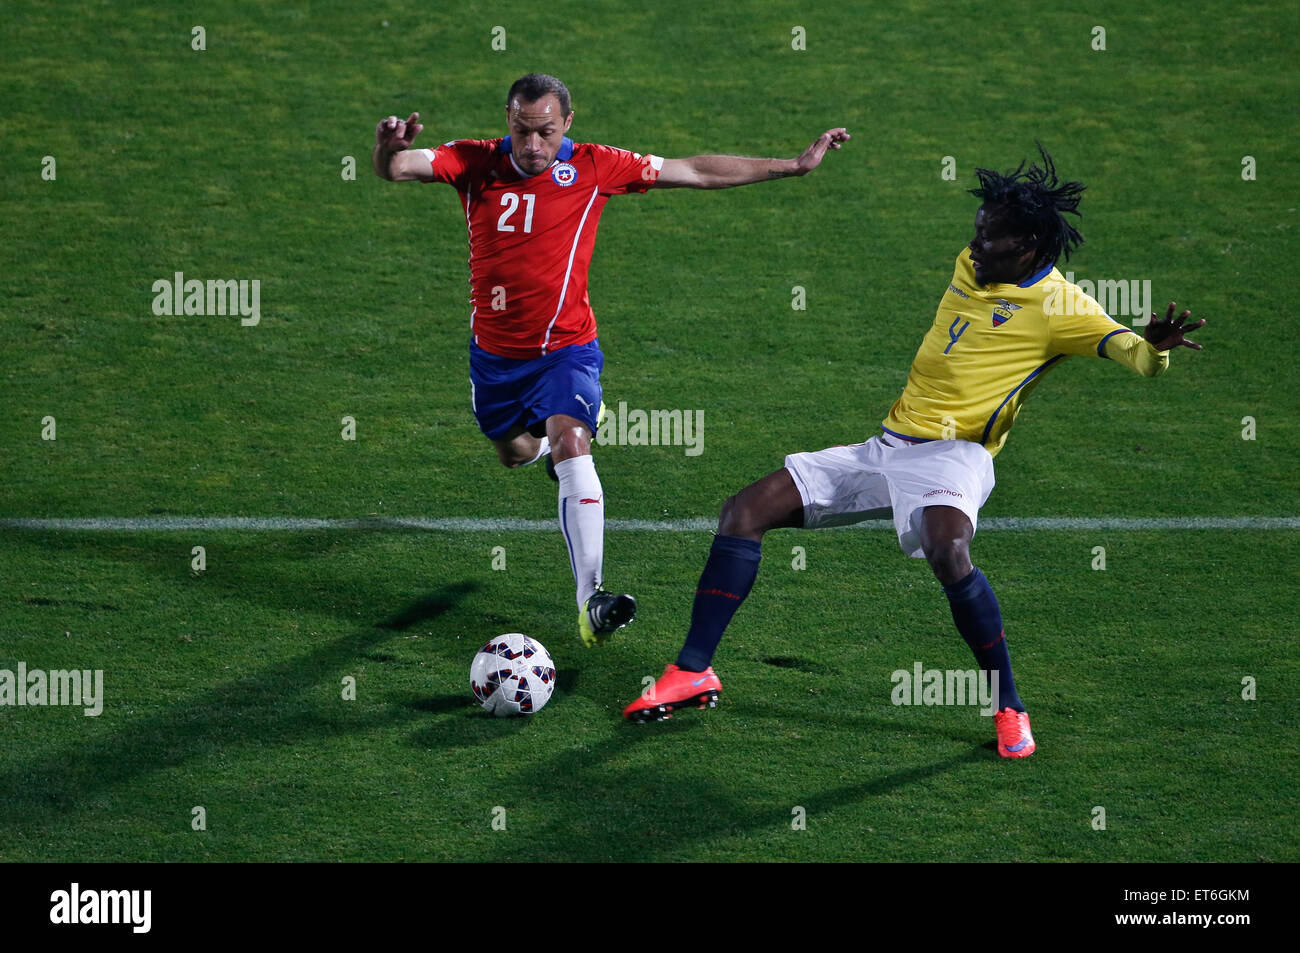 Santiago, Chile. 11th June, 2015. Marcelo Diaz (L) from Chile vies for the ball with Juan Paredes (R) from Ecuador during the opening match of the Copa America 2015, in Santiago, capital of Chile, on June 11, 2015. Chile won 1-0. Credit:  Jorge Villegas/Xinhua/Alamy Live News Stock Photo